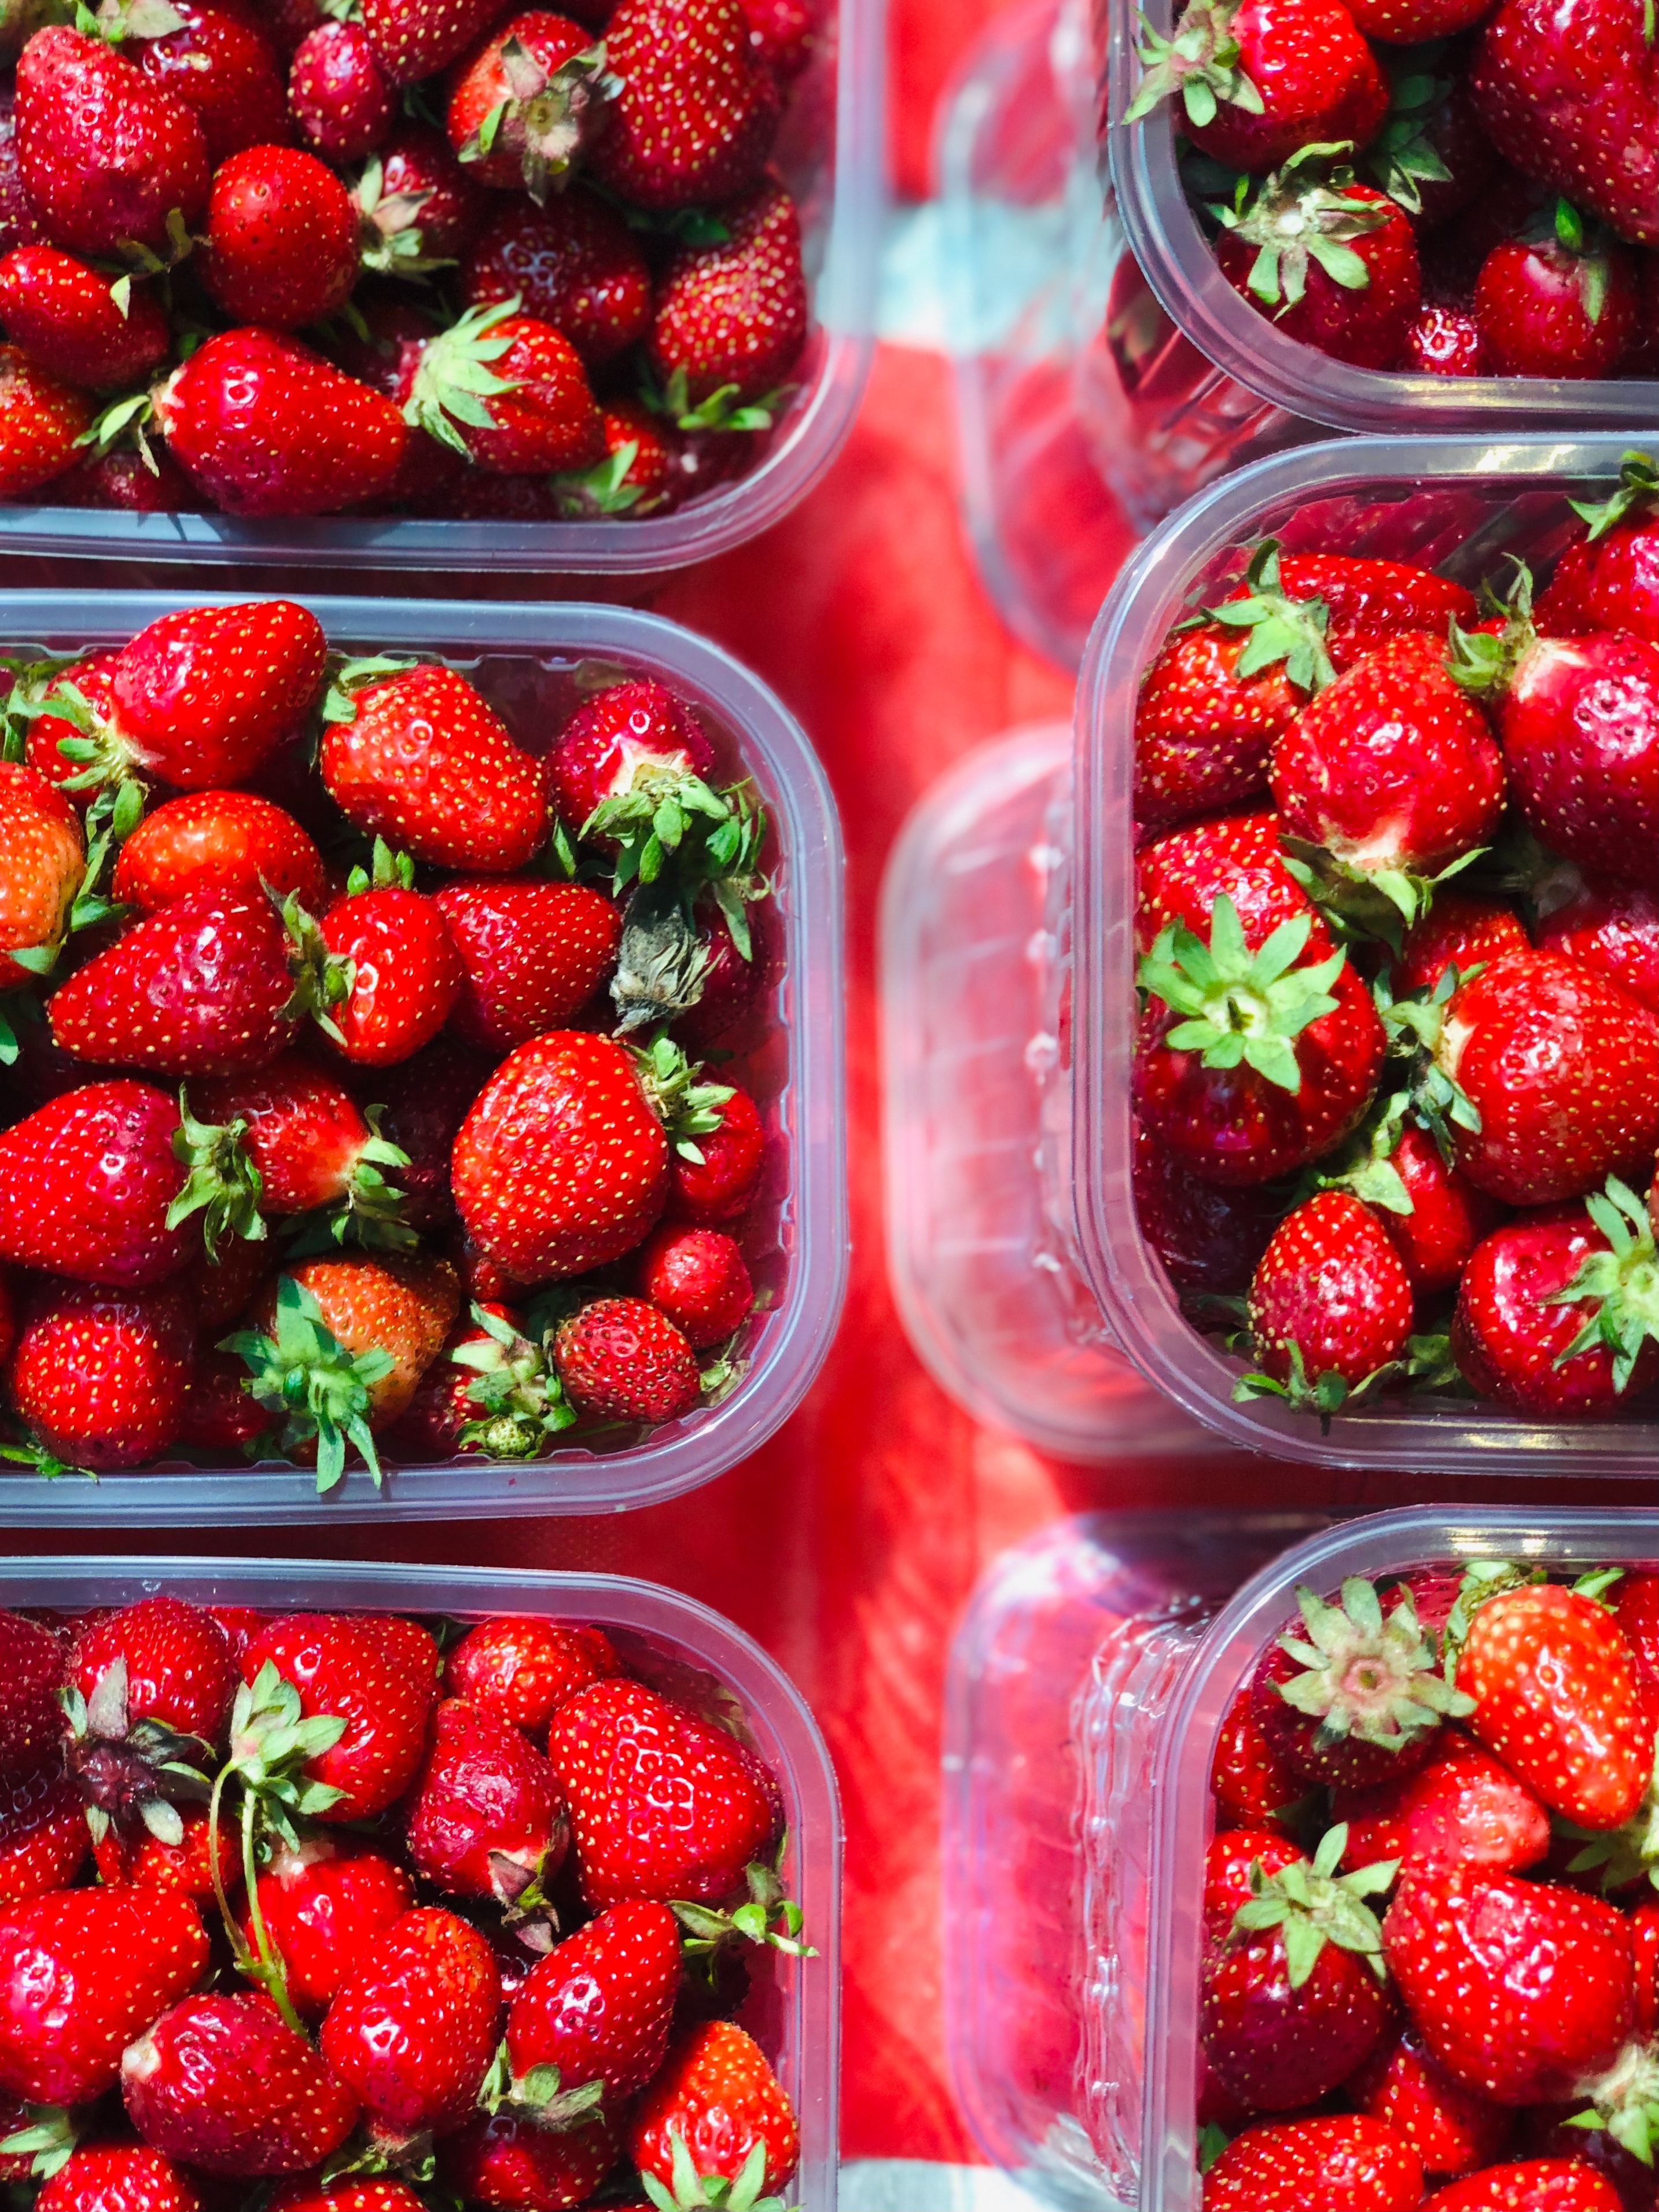 3 Tips for Fresh Produce Packaging